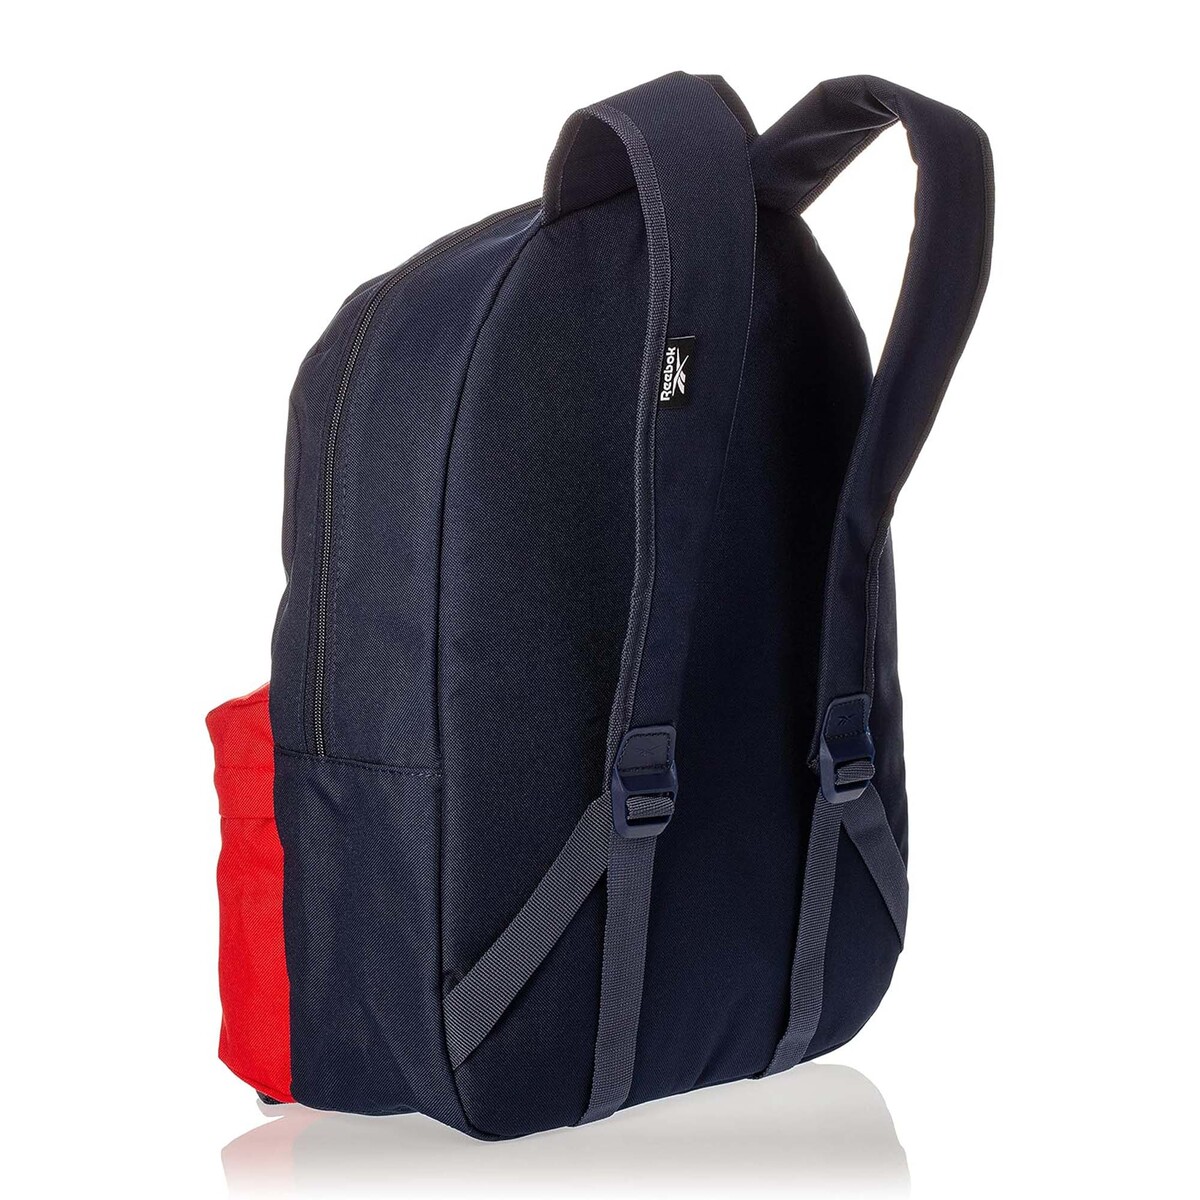 Reebok Active Core Backpack, Navy Blue/Red, H36567